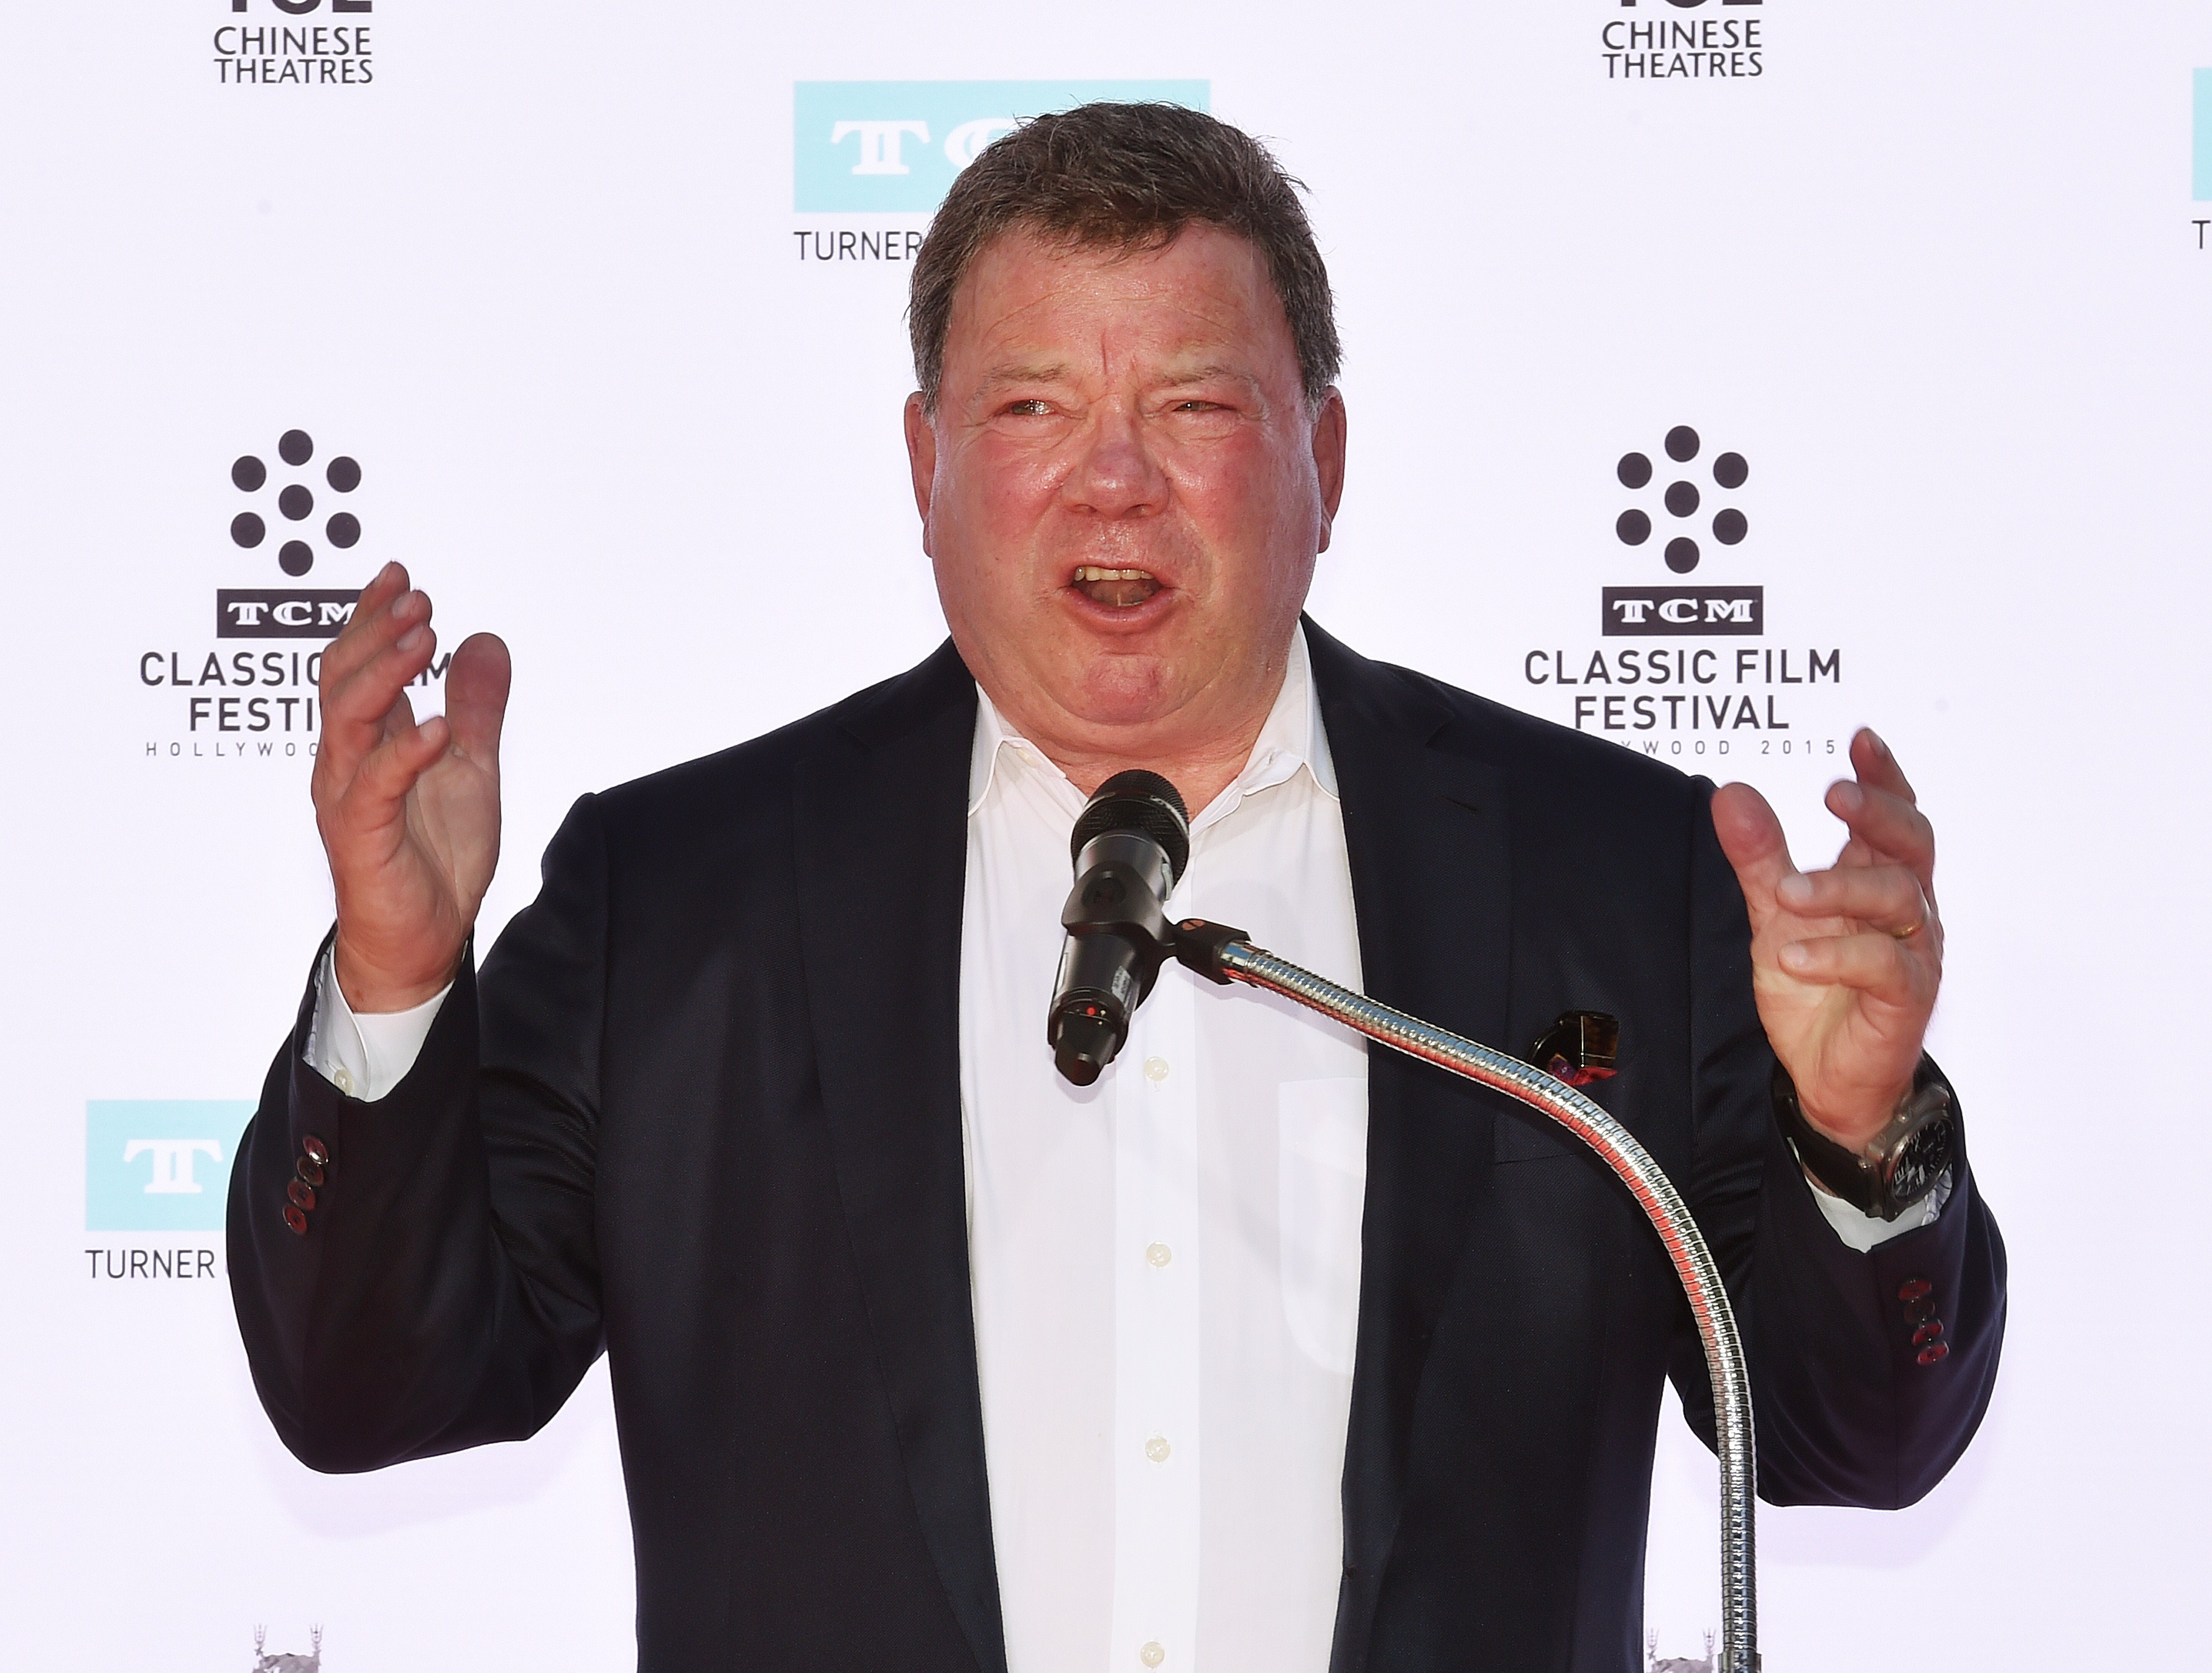 William Shatner speaking to a crowd in front of the Chinese Theatre in Hollywood, California in 2015.